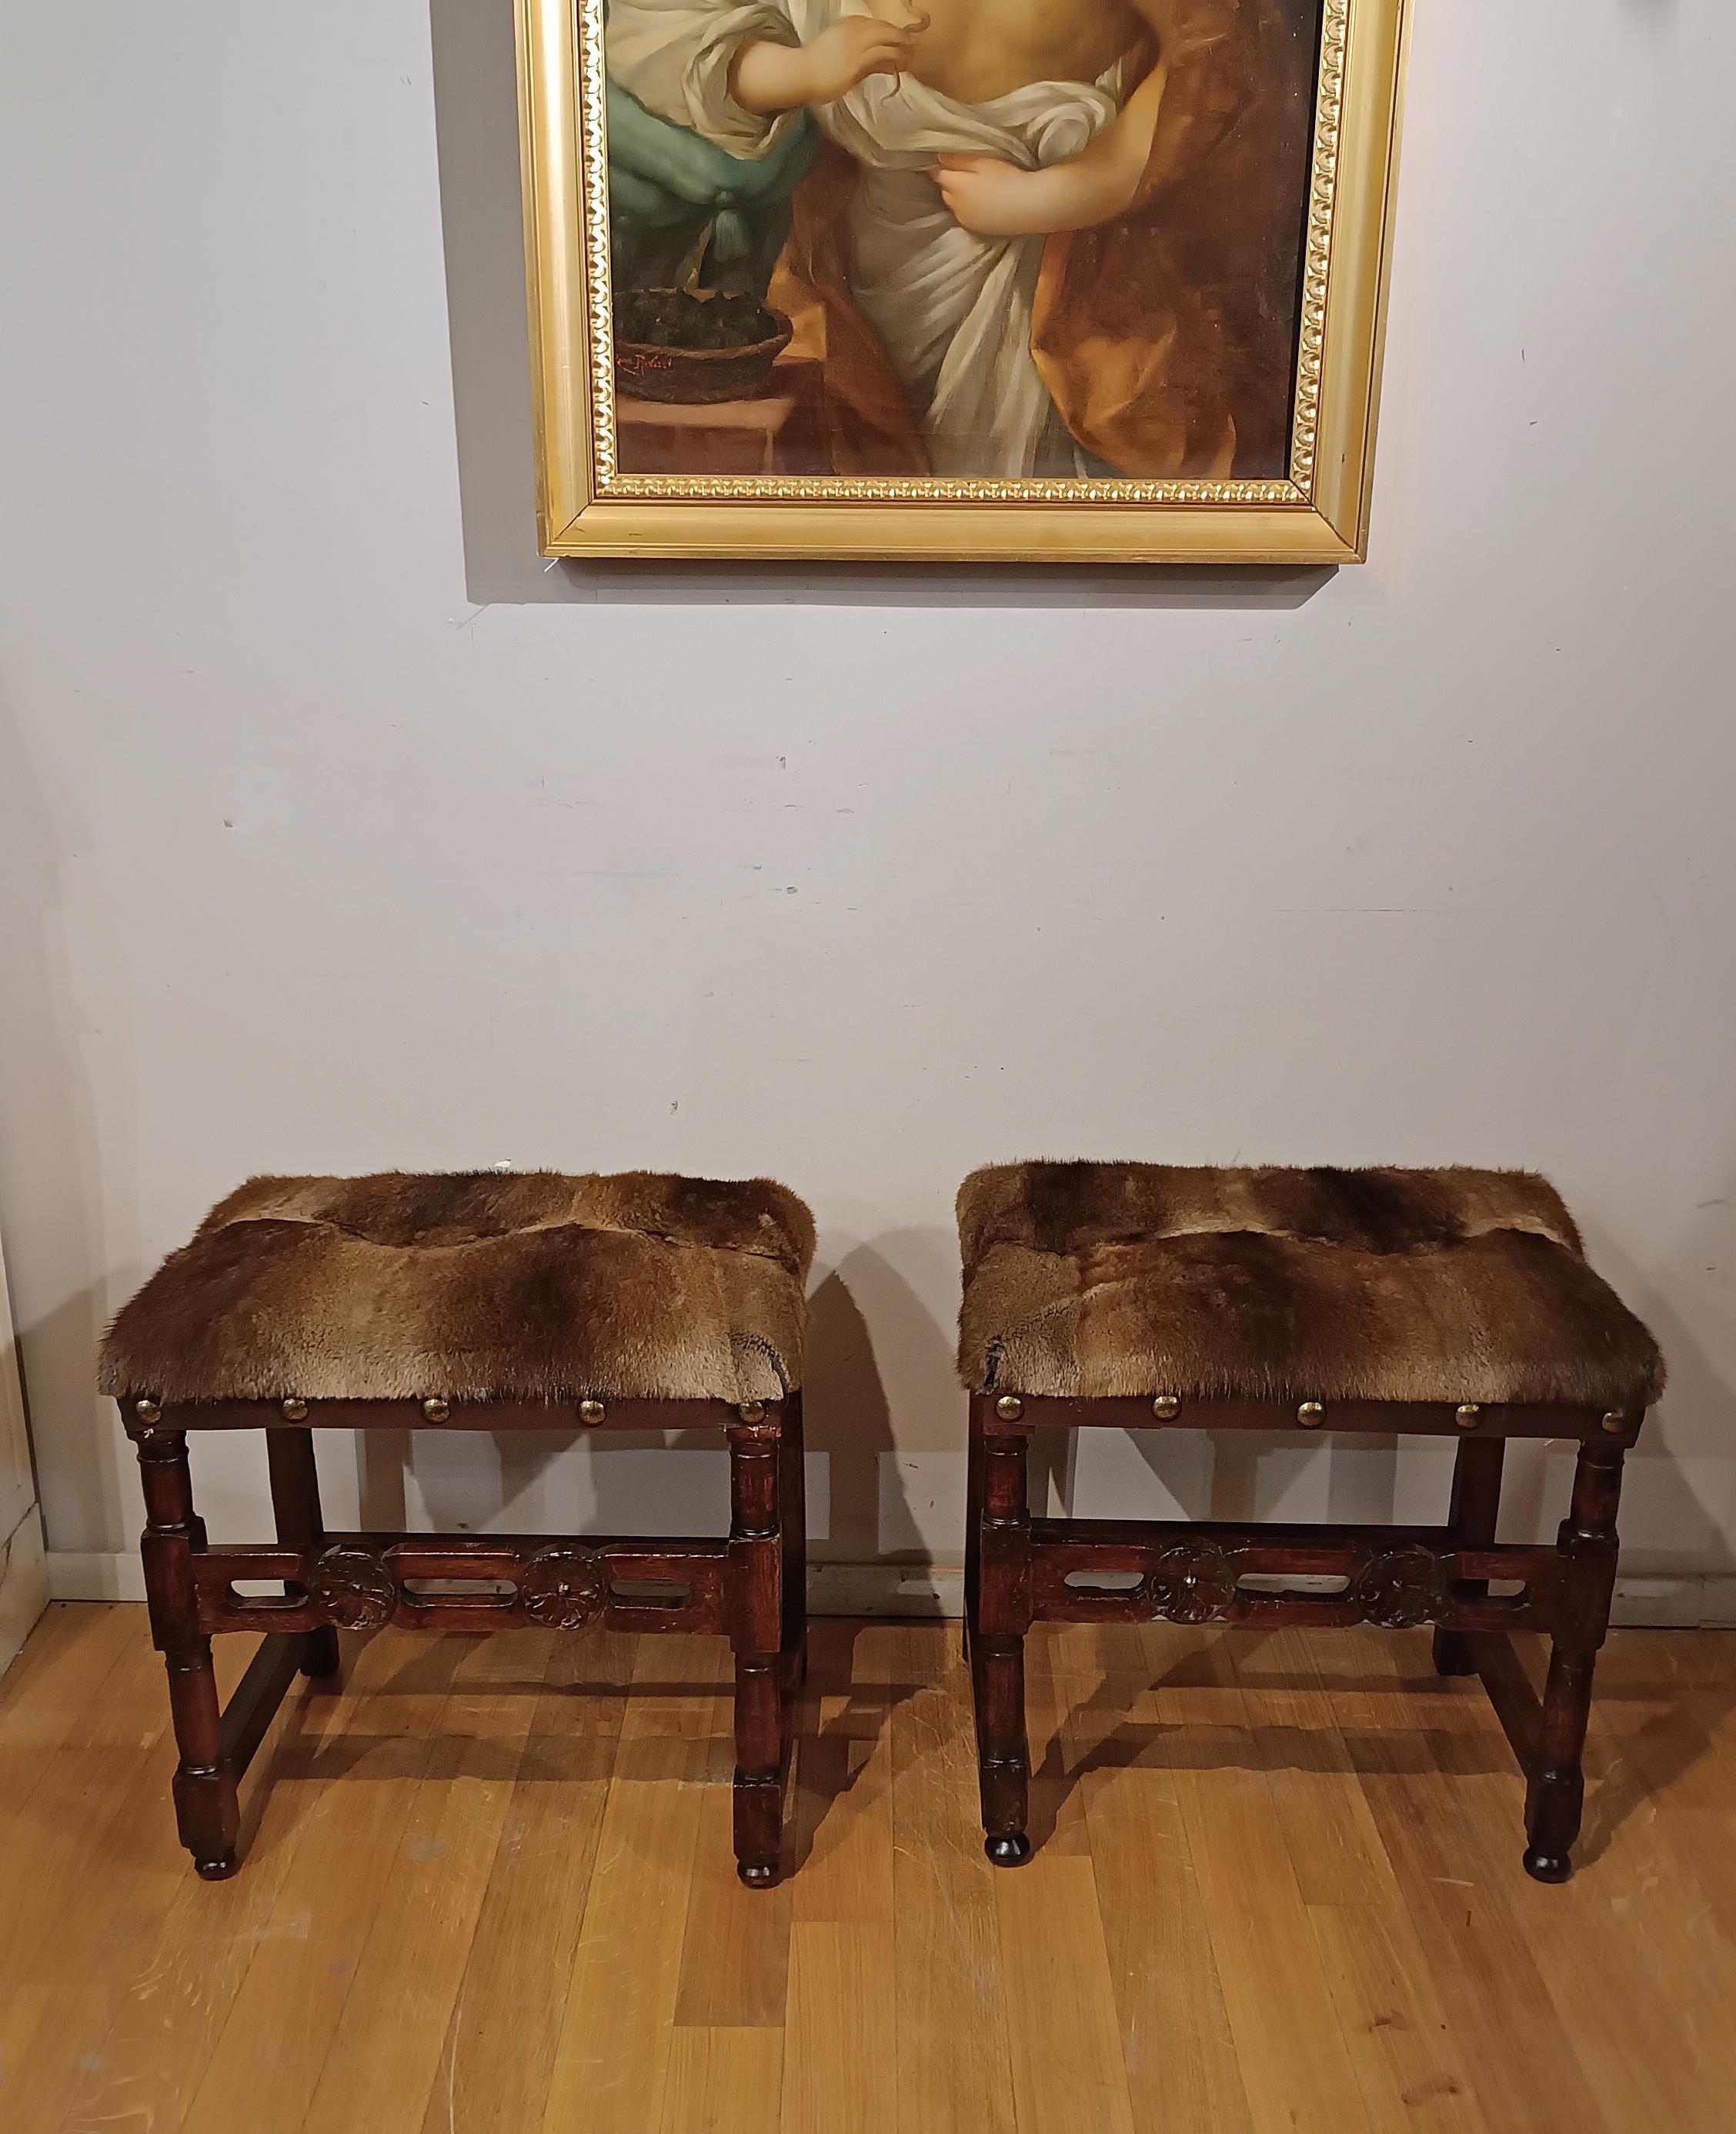 16th CENTURY RENAISSANCE STOOLS IN MINK For Sale 2